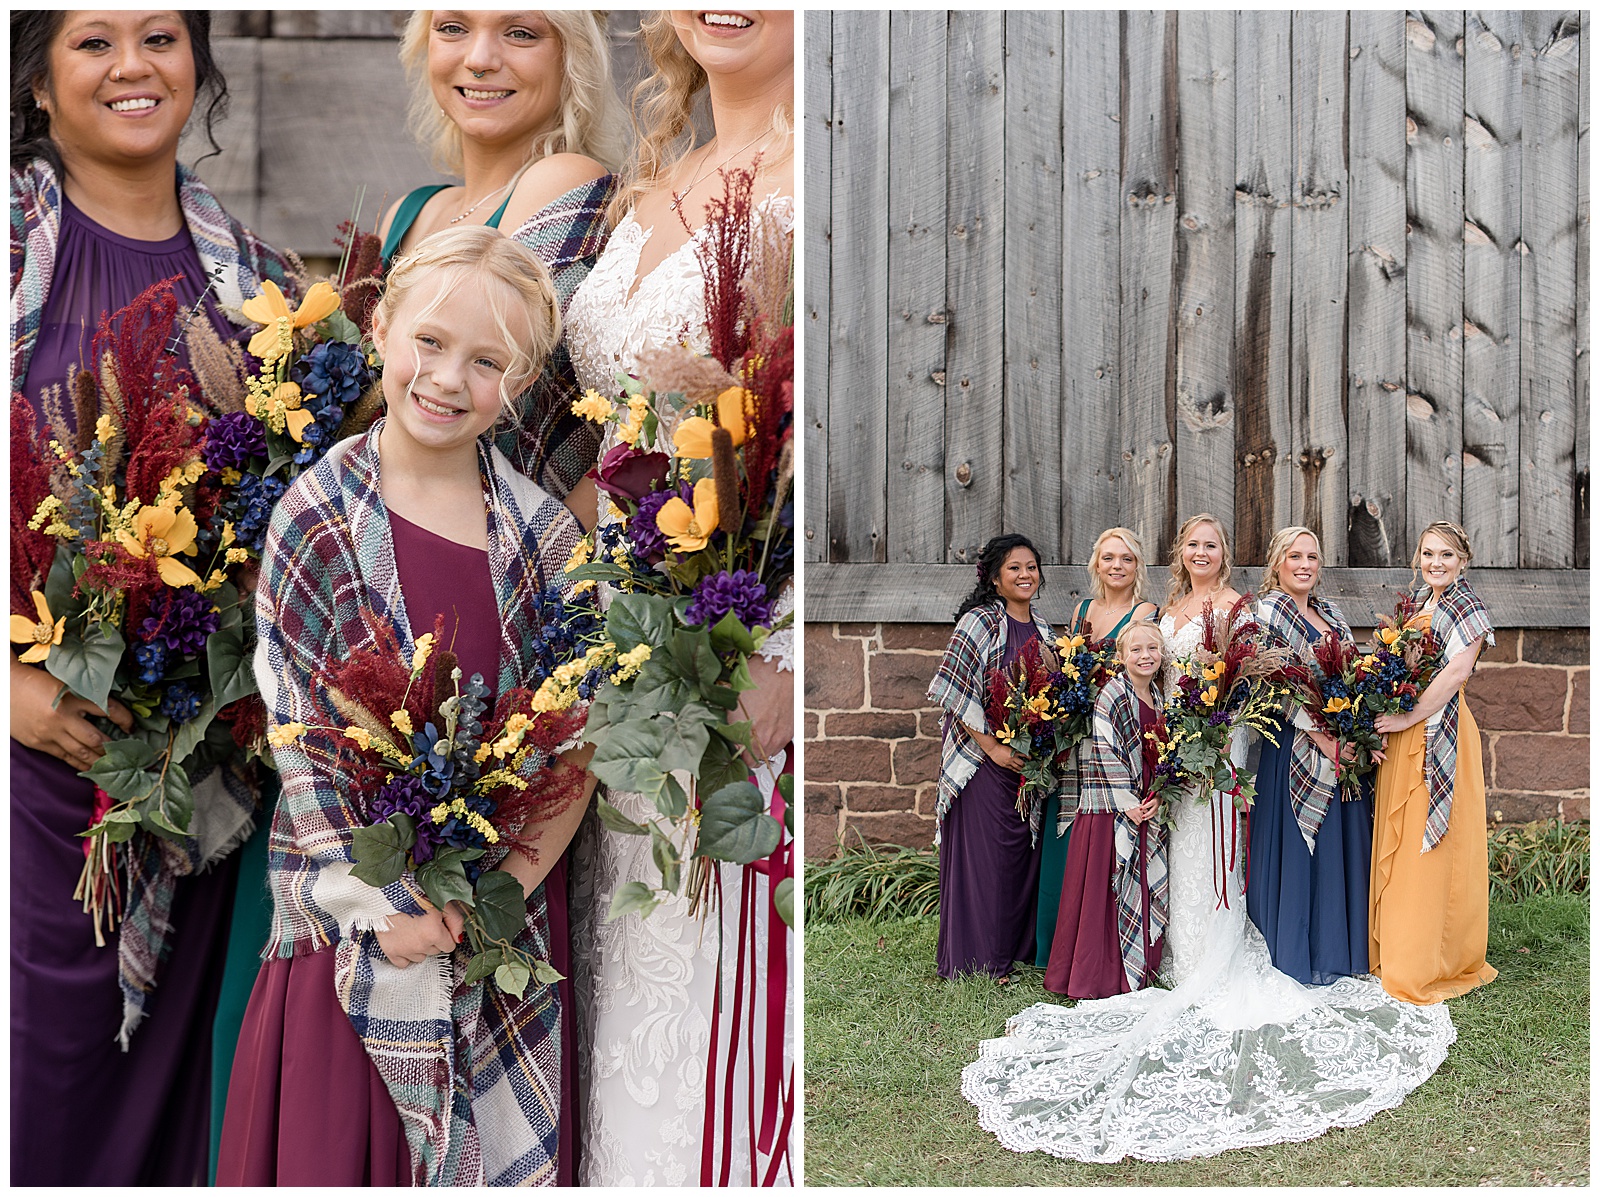 close up photo of bride's daughter smiling at camera with bride and bridesmaids behind her also smiling